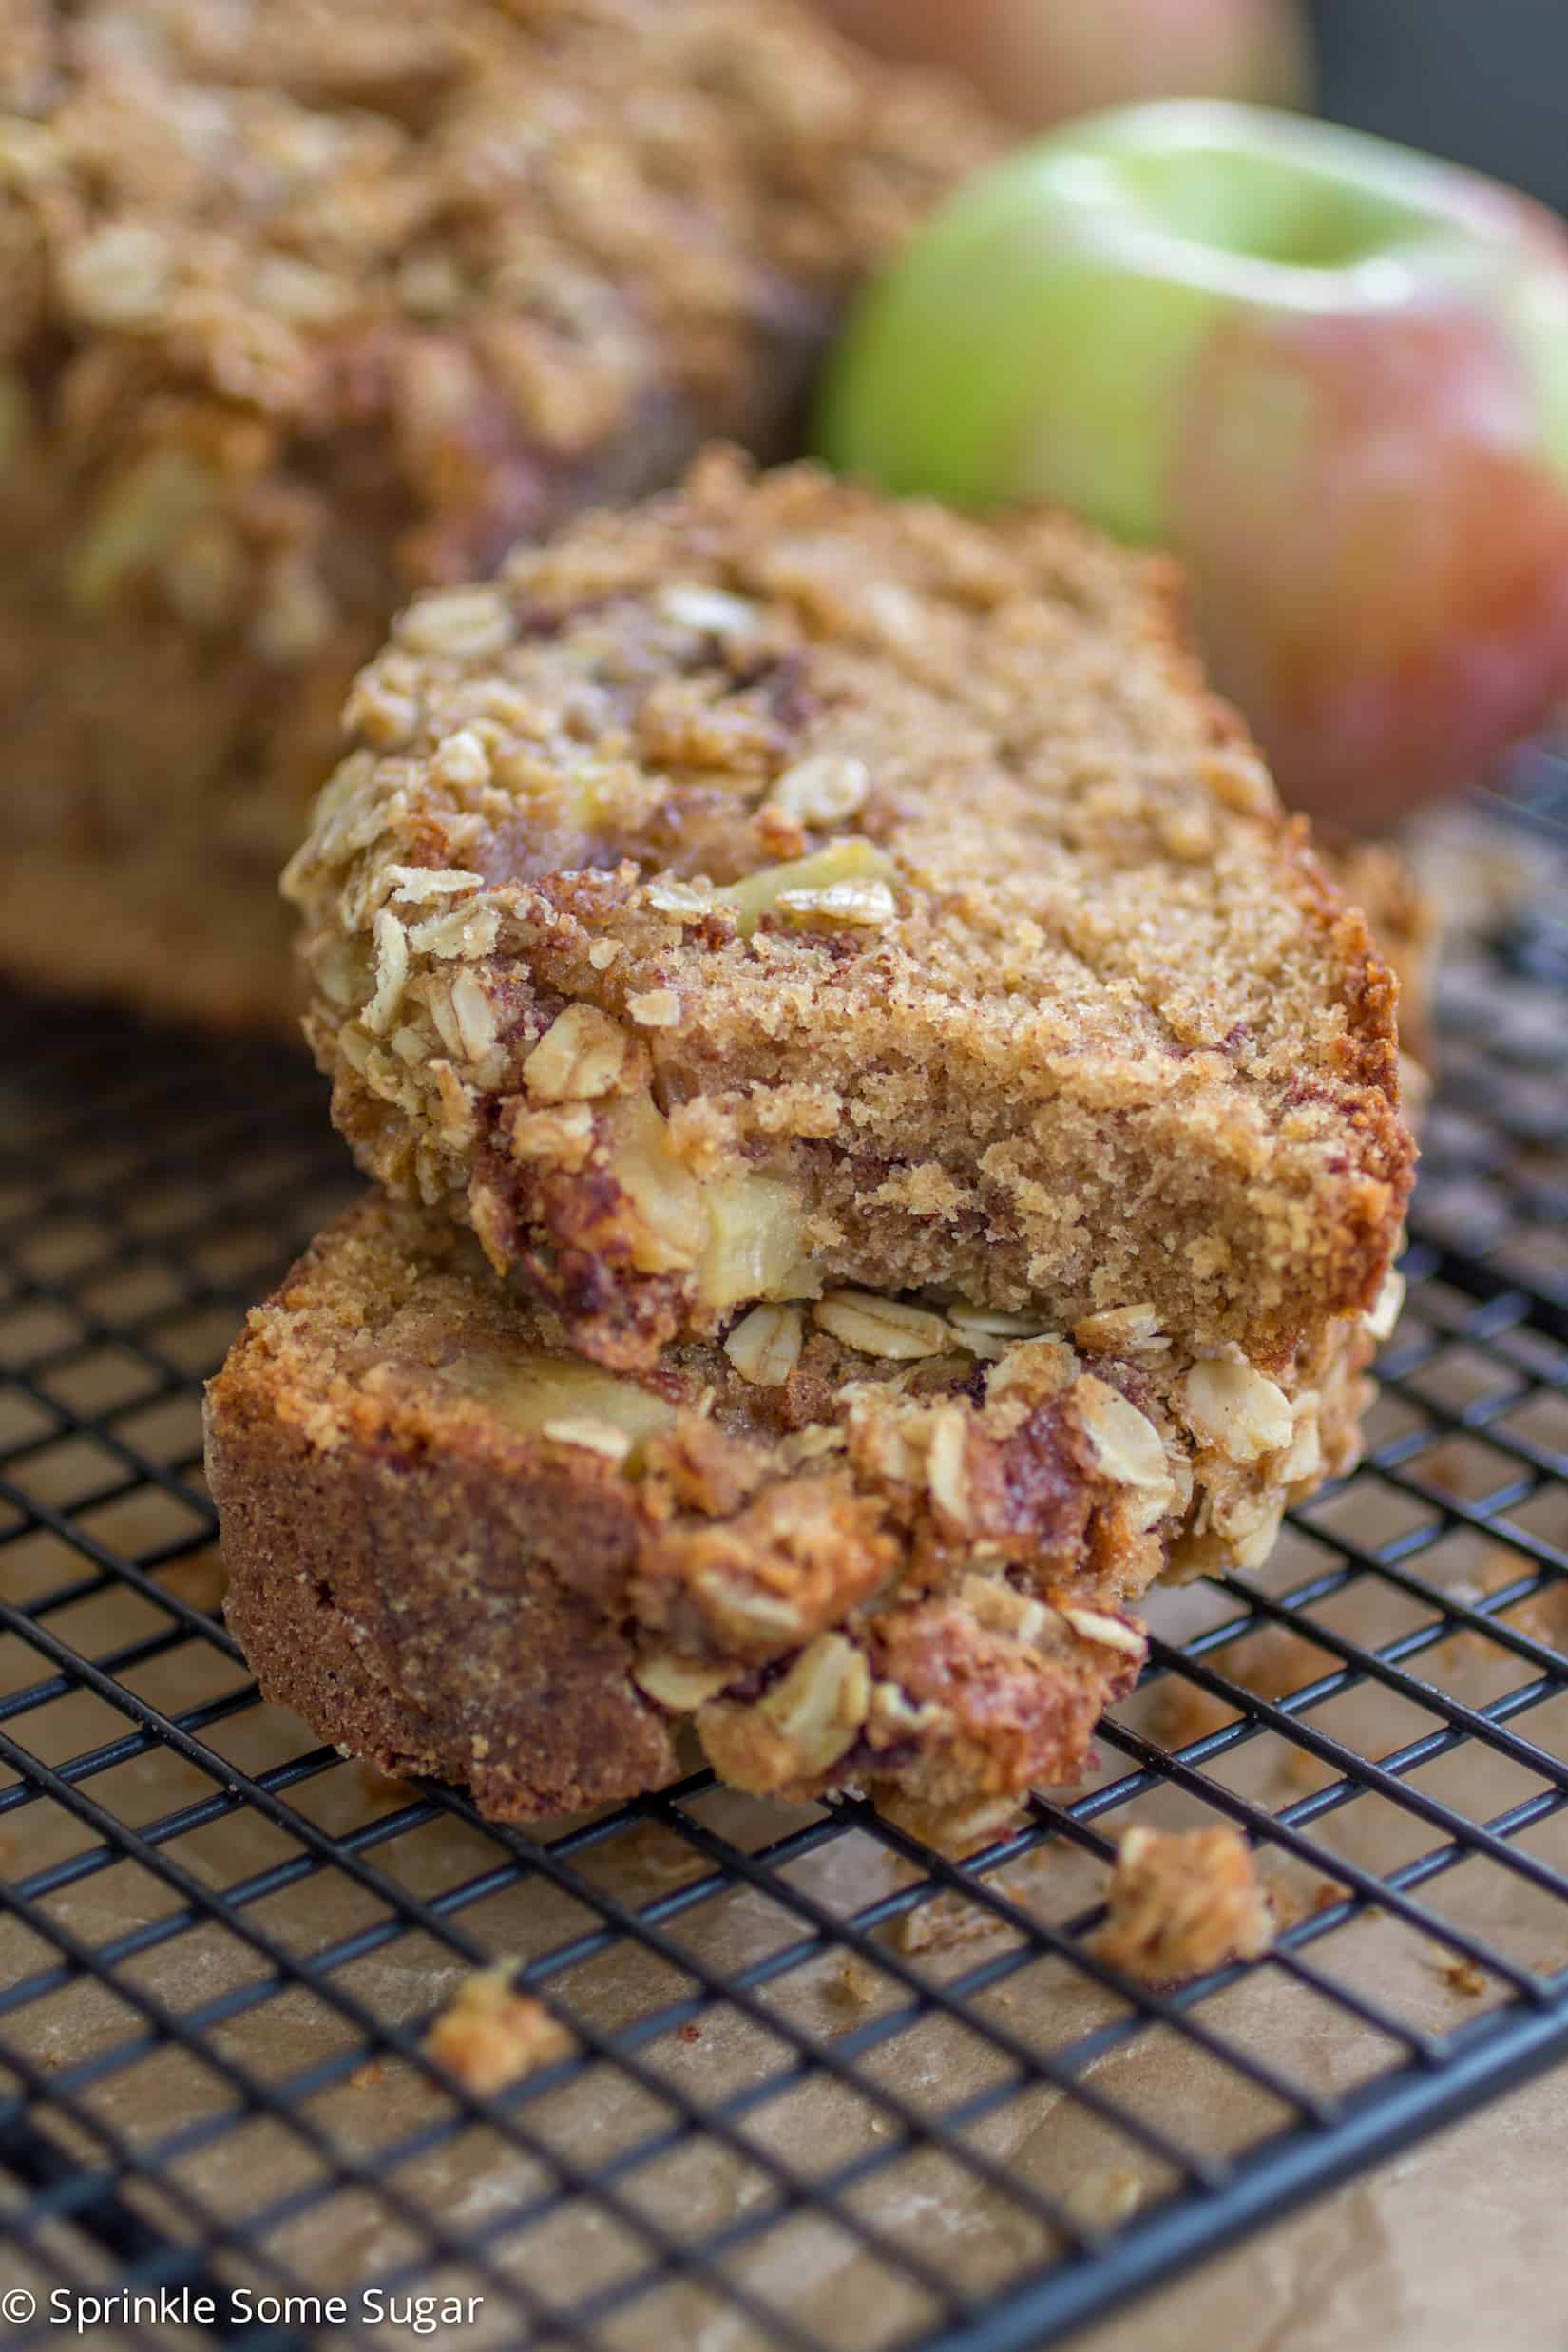 Apple Cinnamon Streusel Bread slices stacked on top of each other with a bite taken out of the top slice.